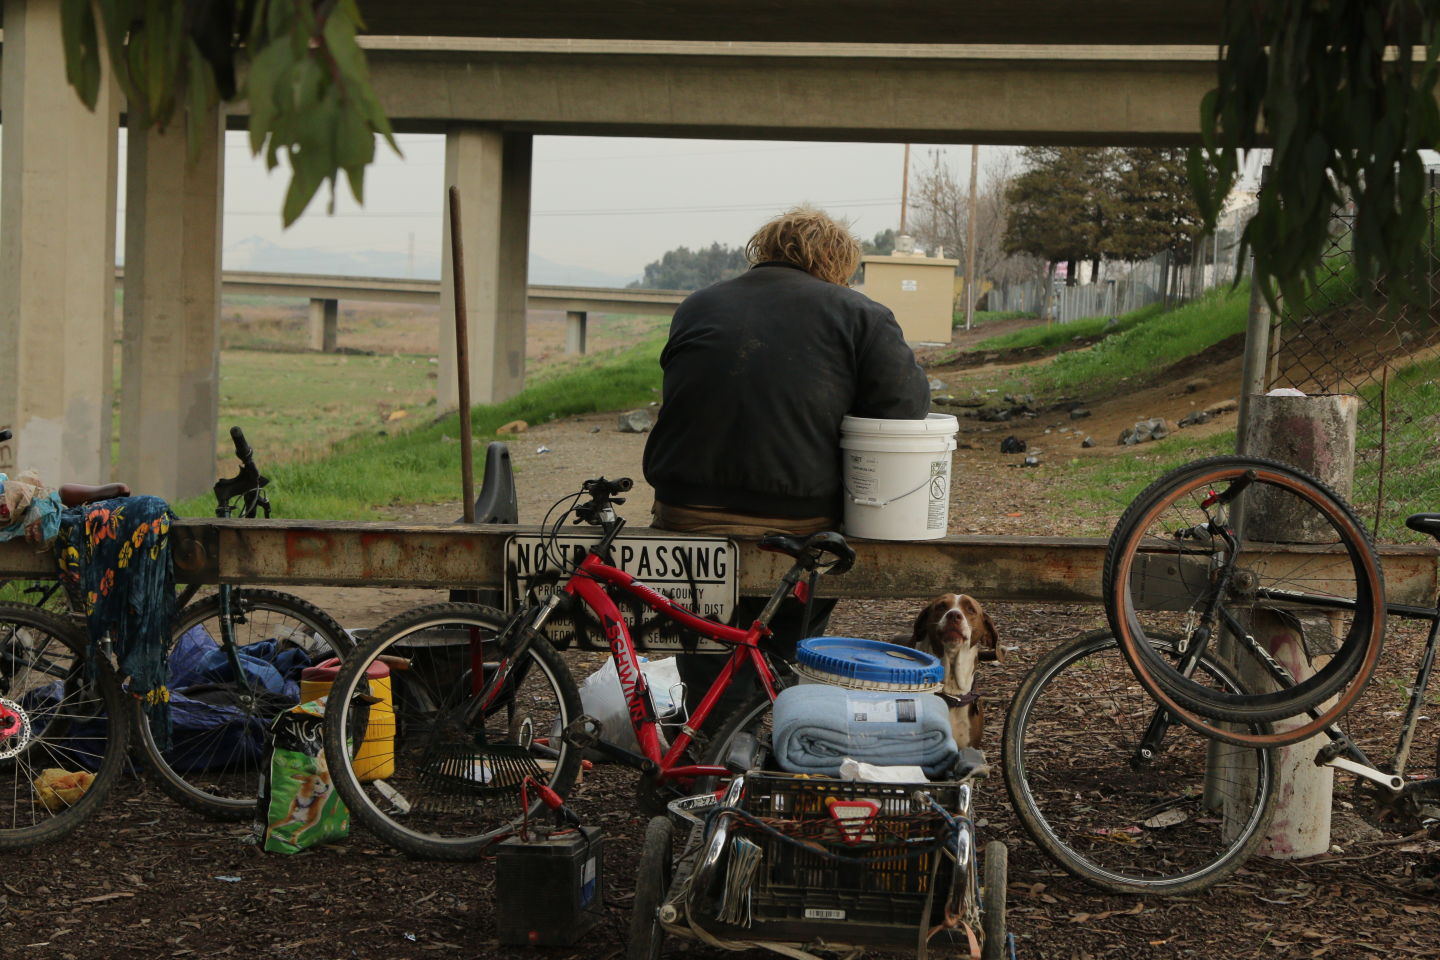 A homeless man sits at his encampment in Contra Costa County, where volunteers warned of a rainstorm that could flood the canal under the overpass where he was situated.  Ericka Cruz Guevarra/KQED